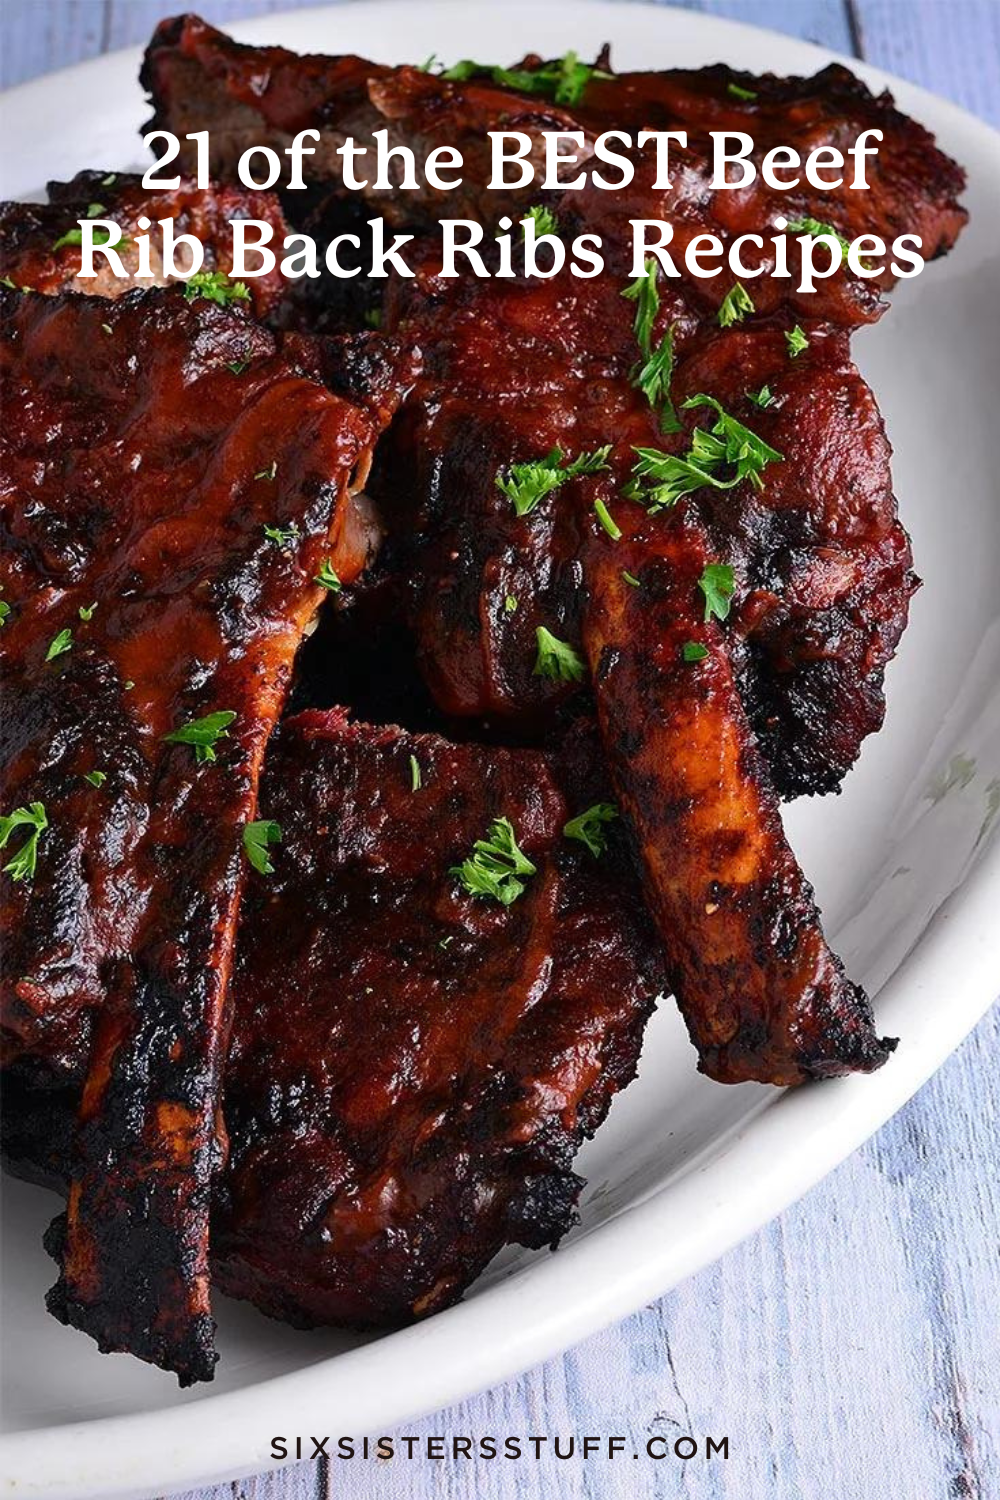 21 of the BEST Beef Rib Back Ribs Recipes